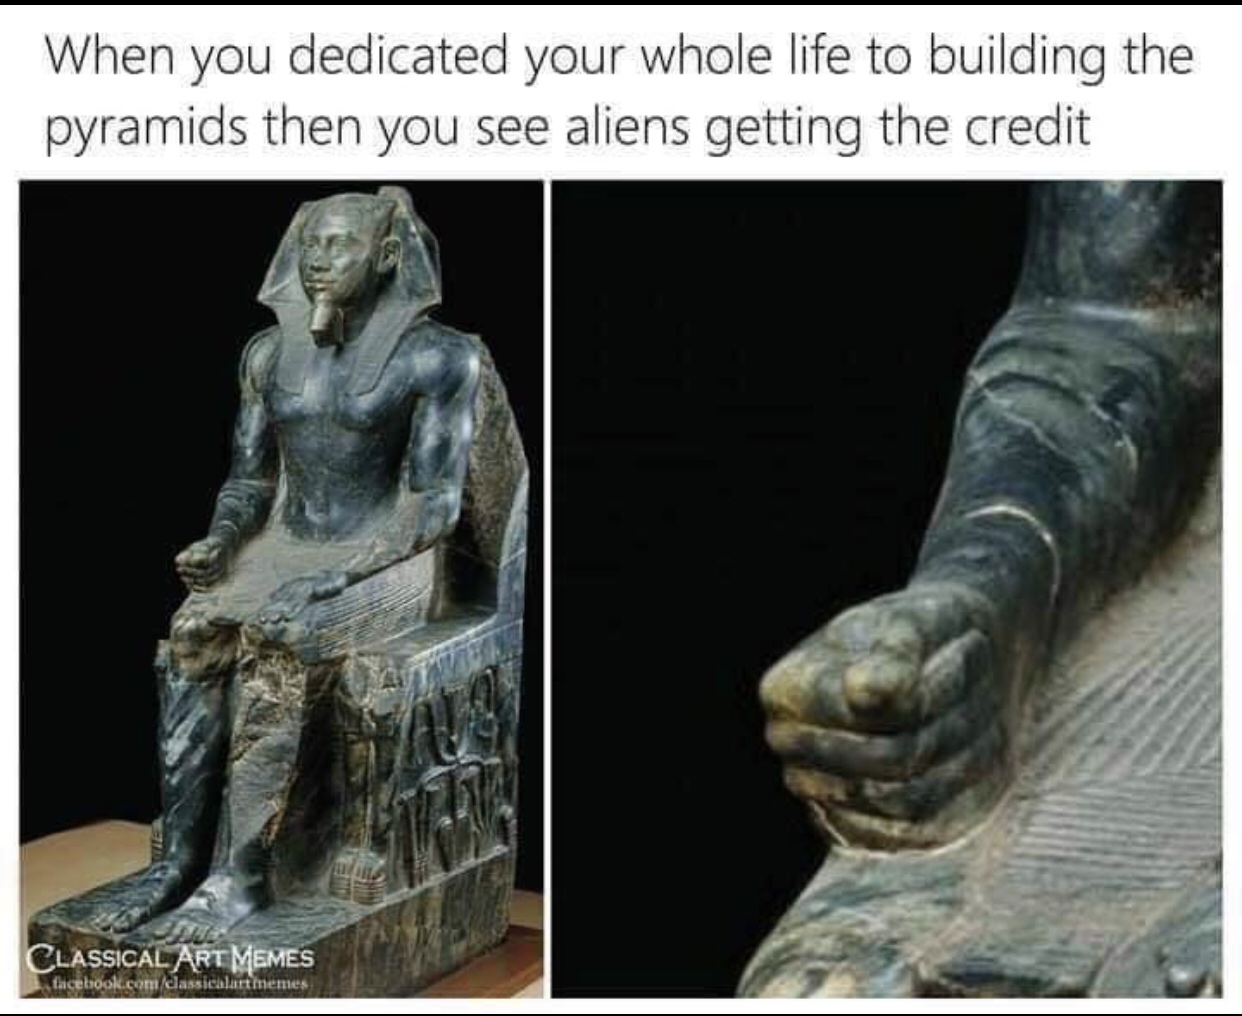 khafre enthroned - When you dedicated your whole life to building the pyramids then you see aliens getting the credit Classical Art Memes facebook.comclassicalarthemes